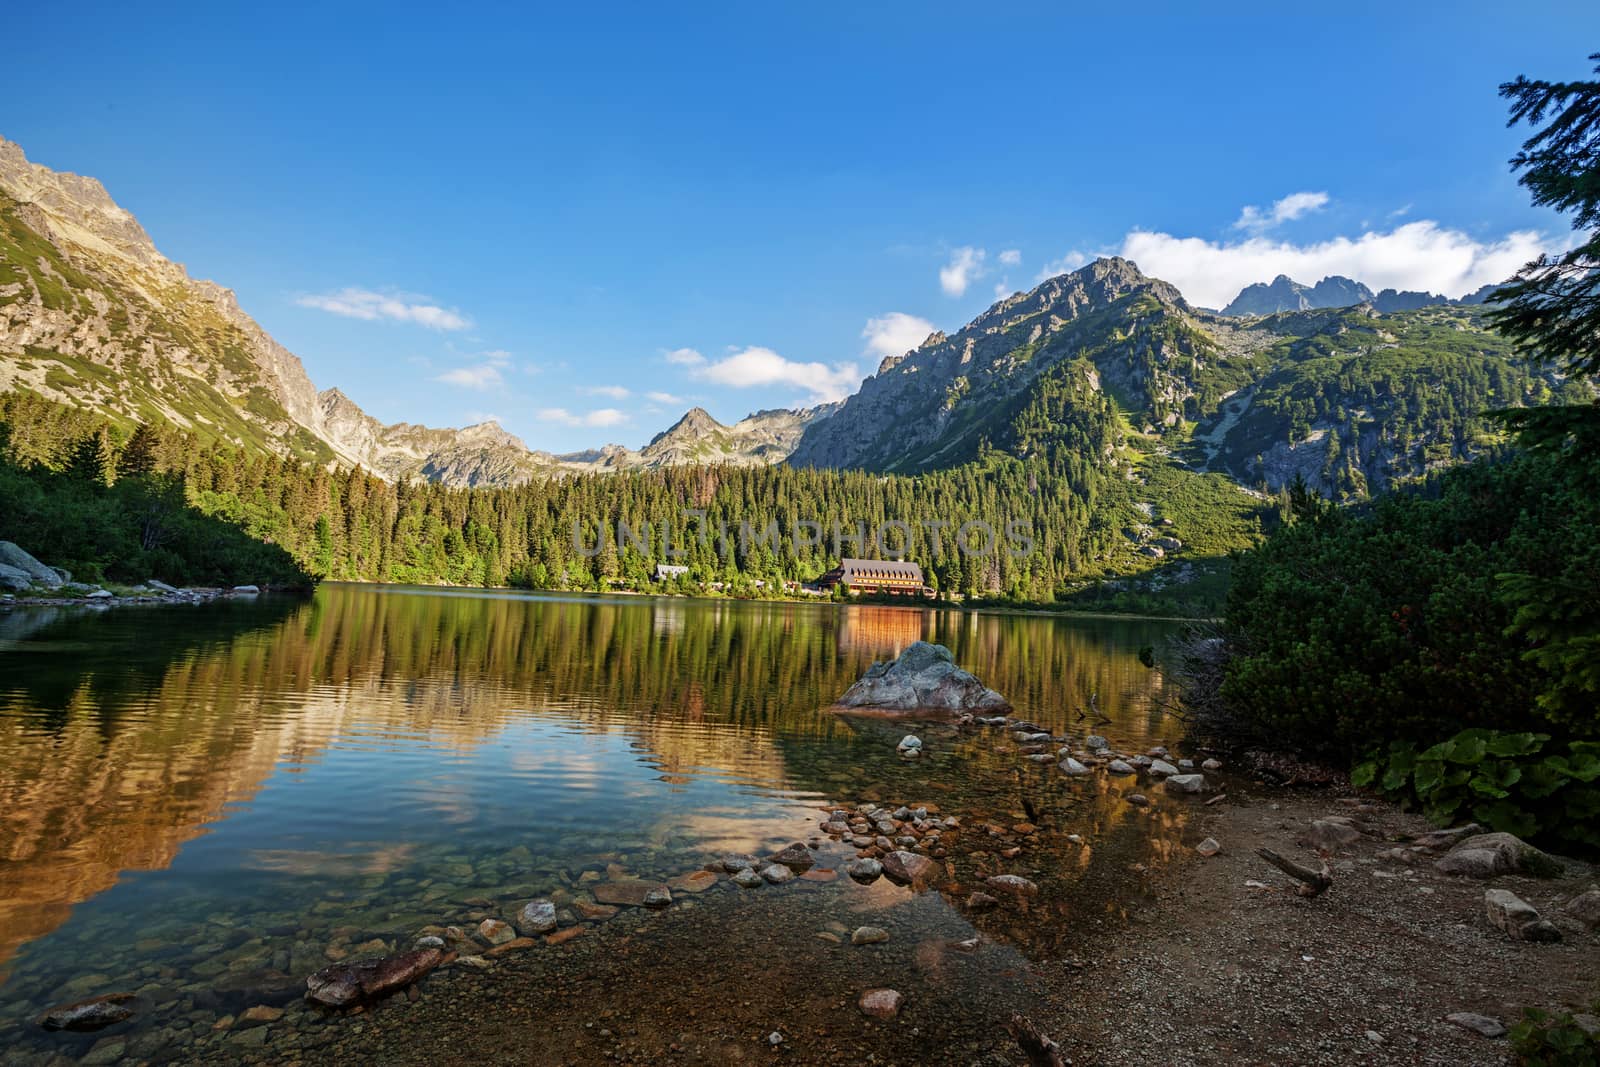 Alpine lake Popradske pleso with touristic shelter - Chata pri popradskom plese, in the morning with a great view on Tatra mountains.